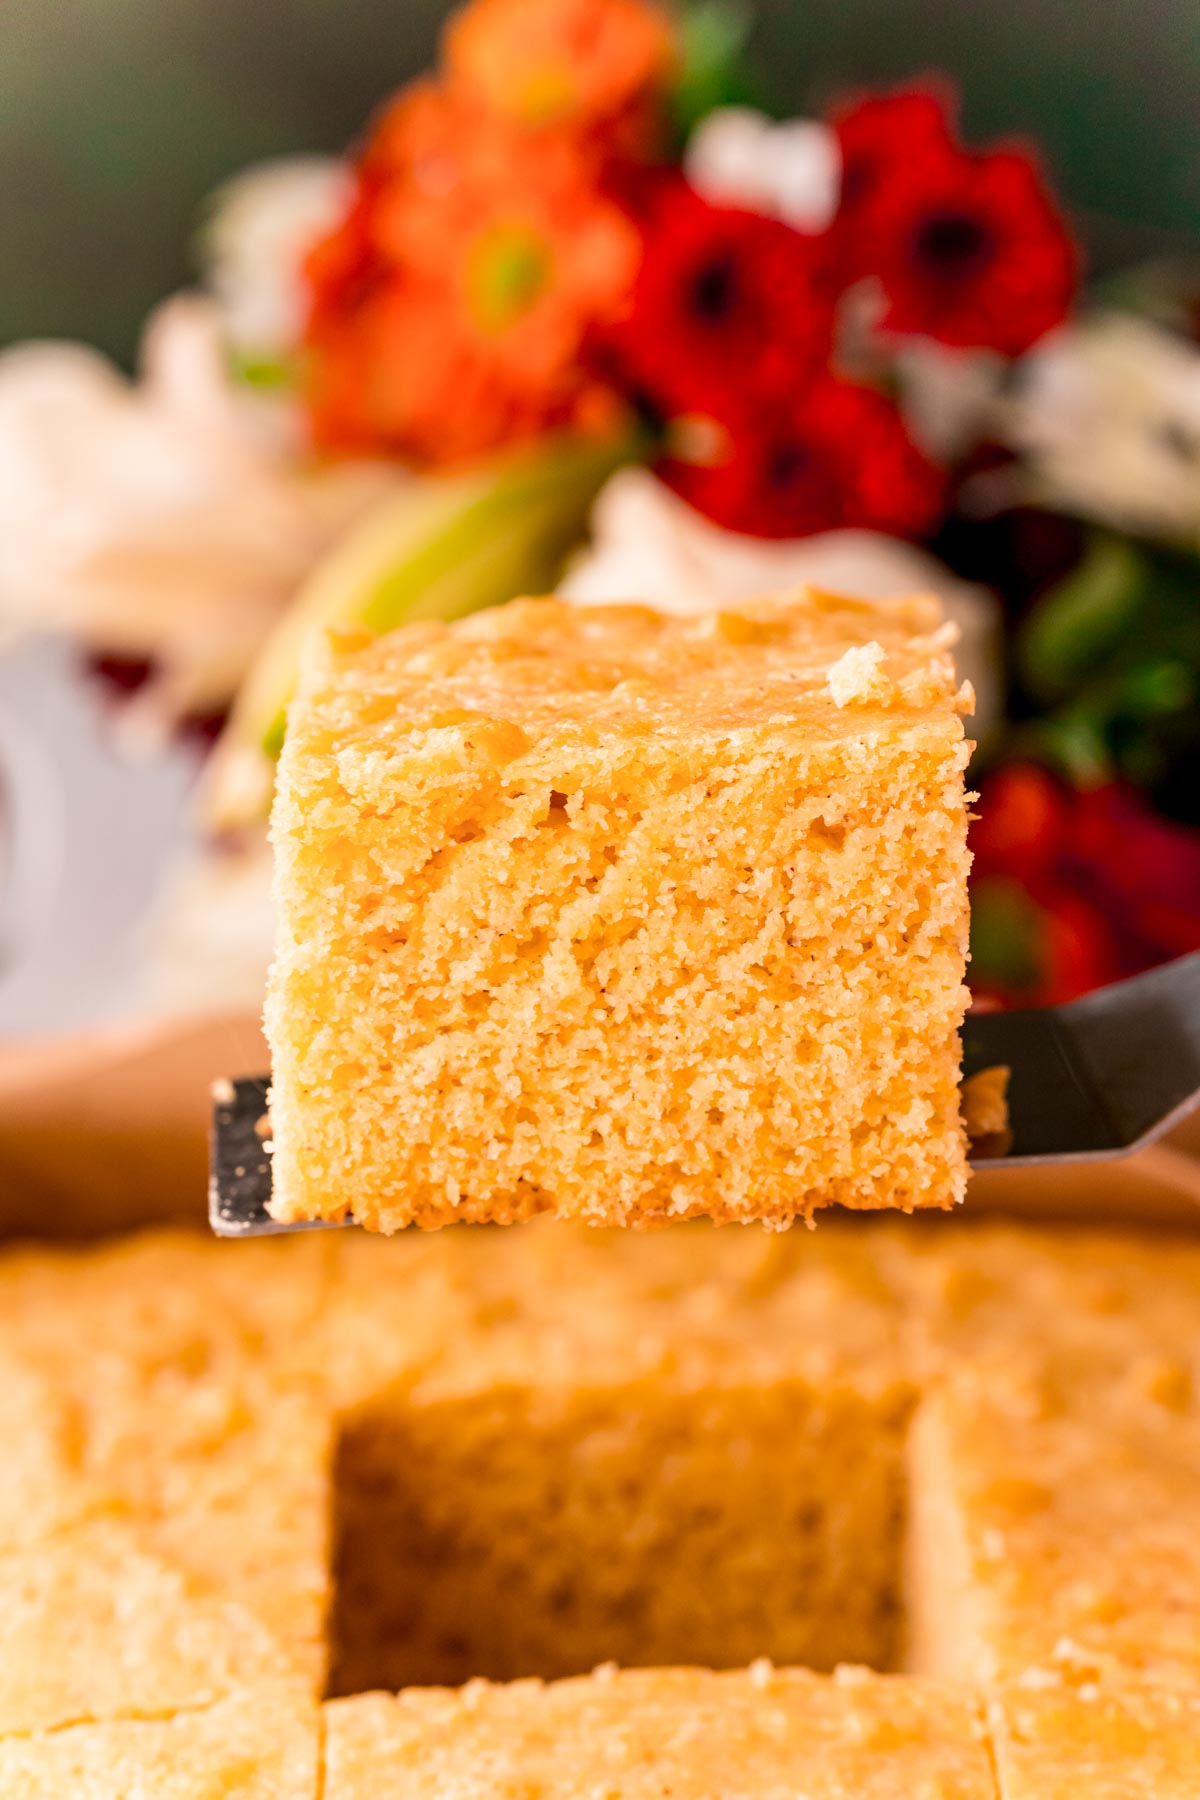 A slice of cornbread being lifted out of a baking pan.